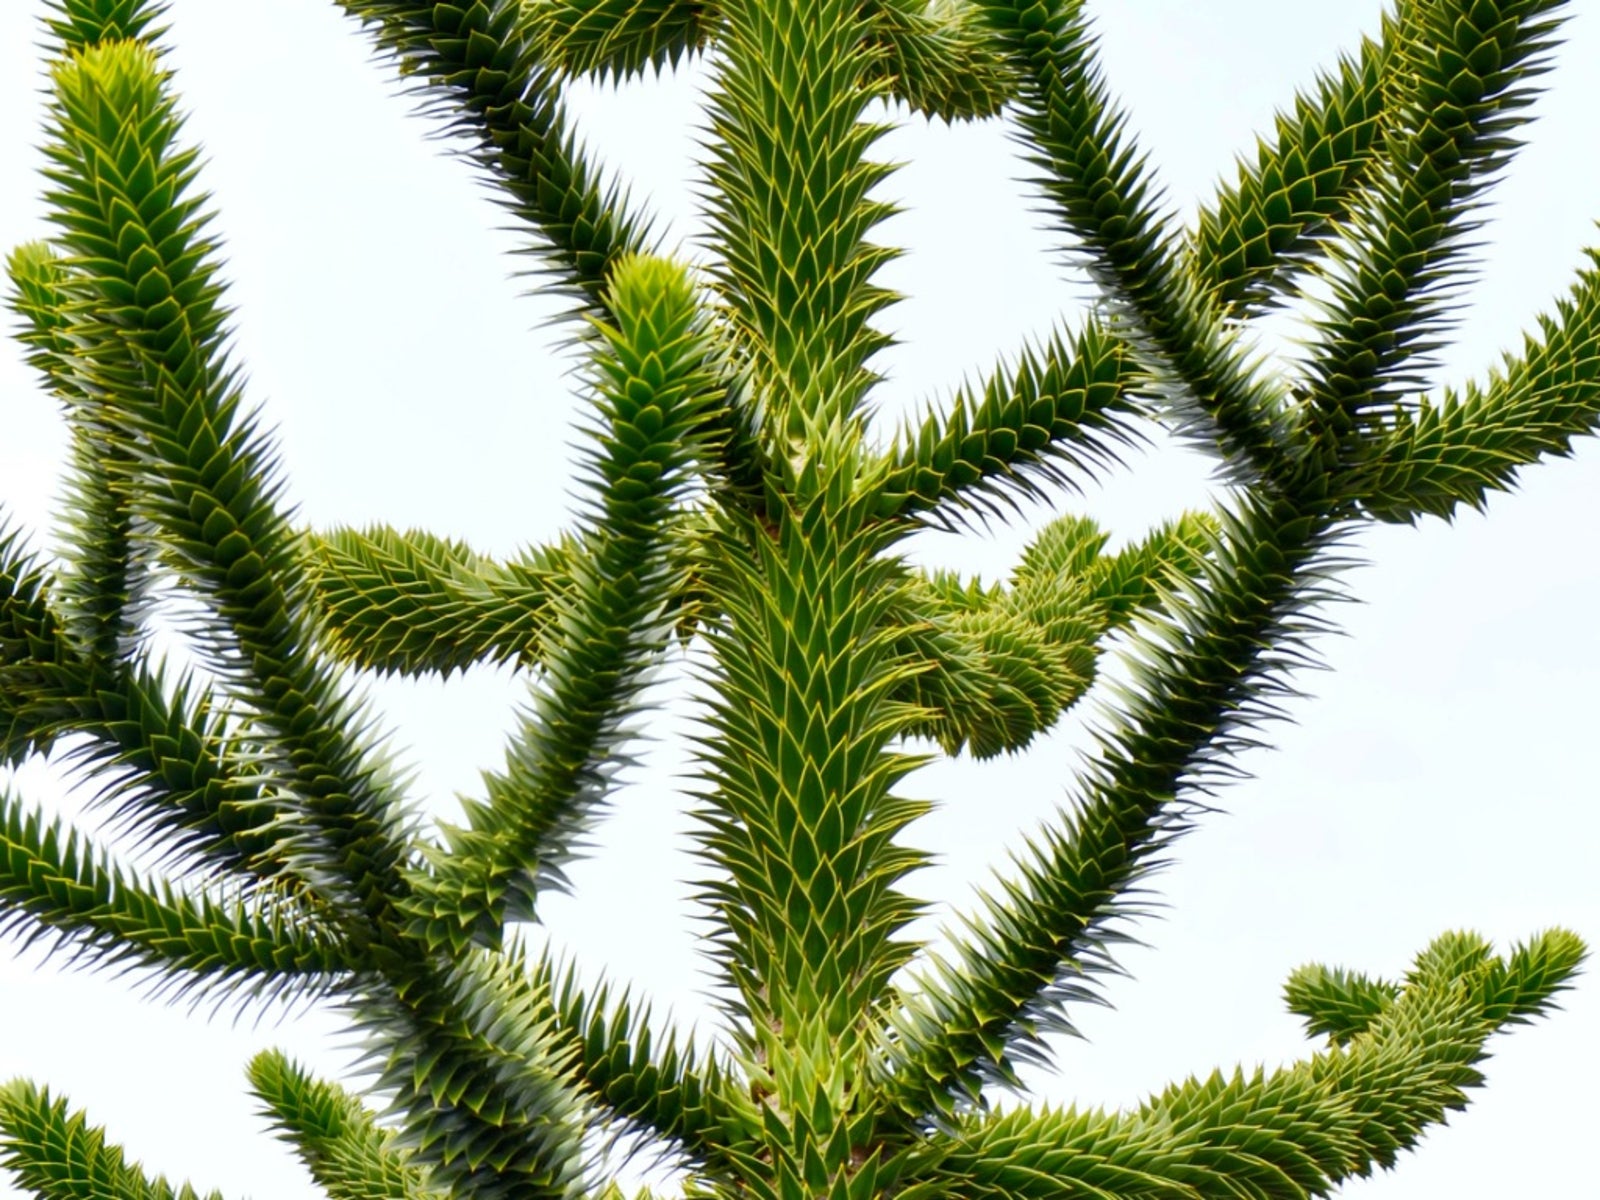 Outdoor Monkey Puzzle Care   Planting Monkey Puzzle Trees In The ...